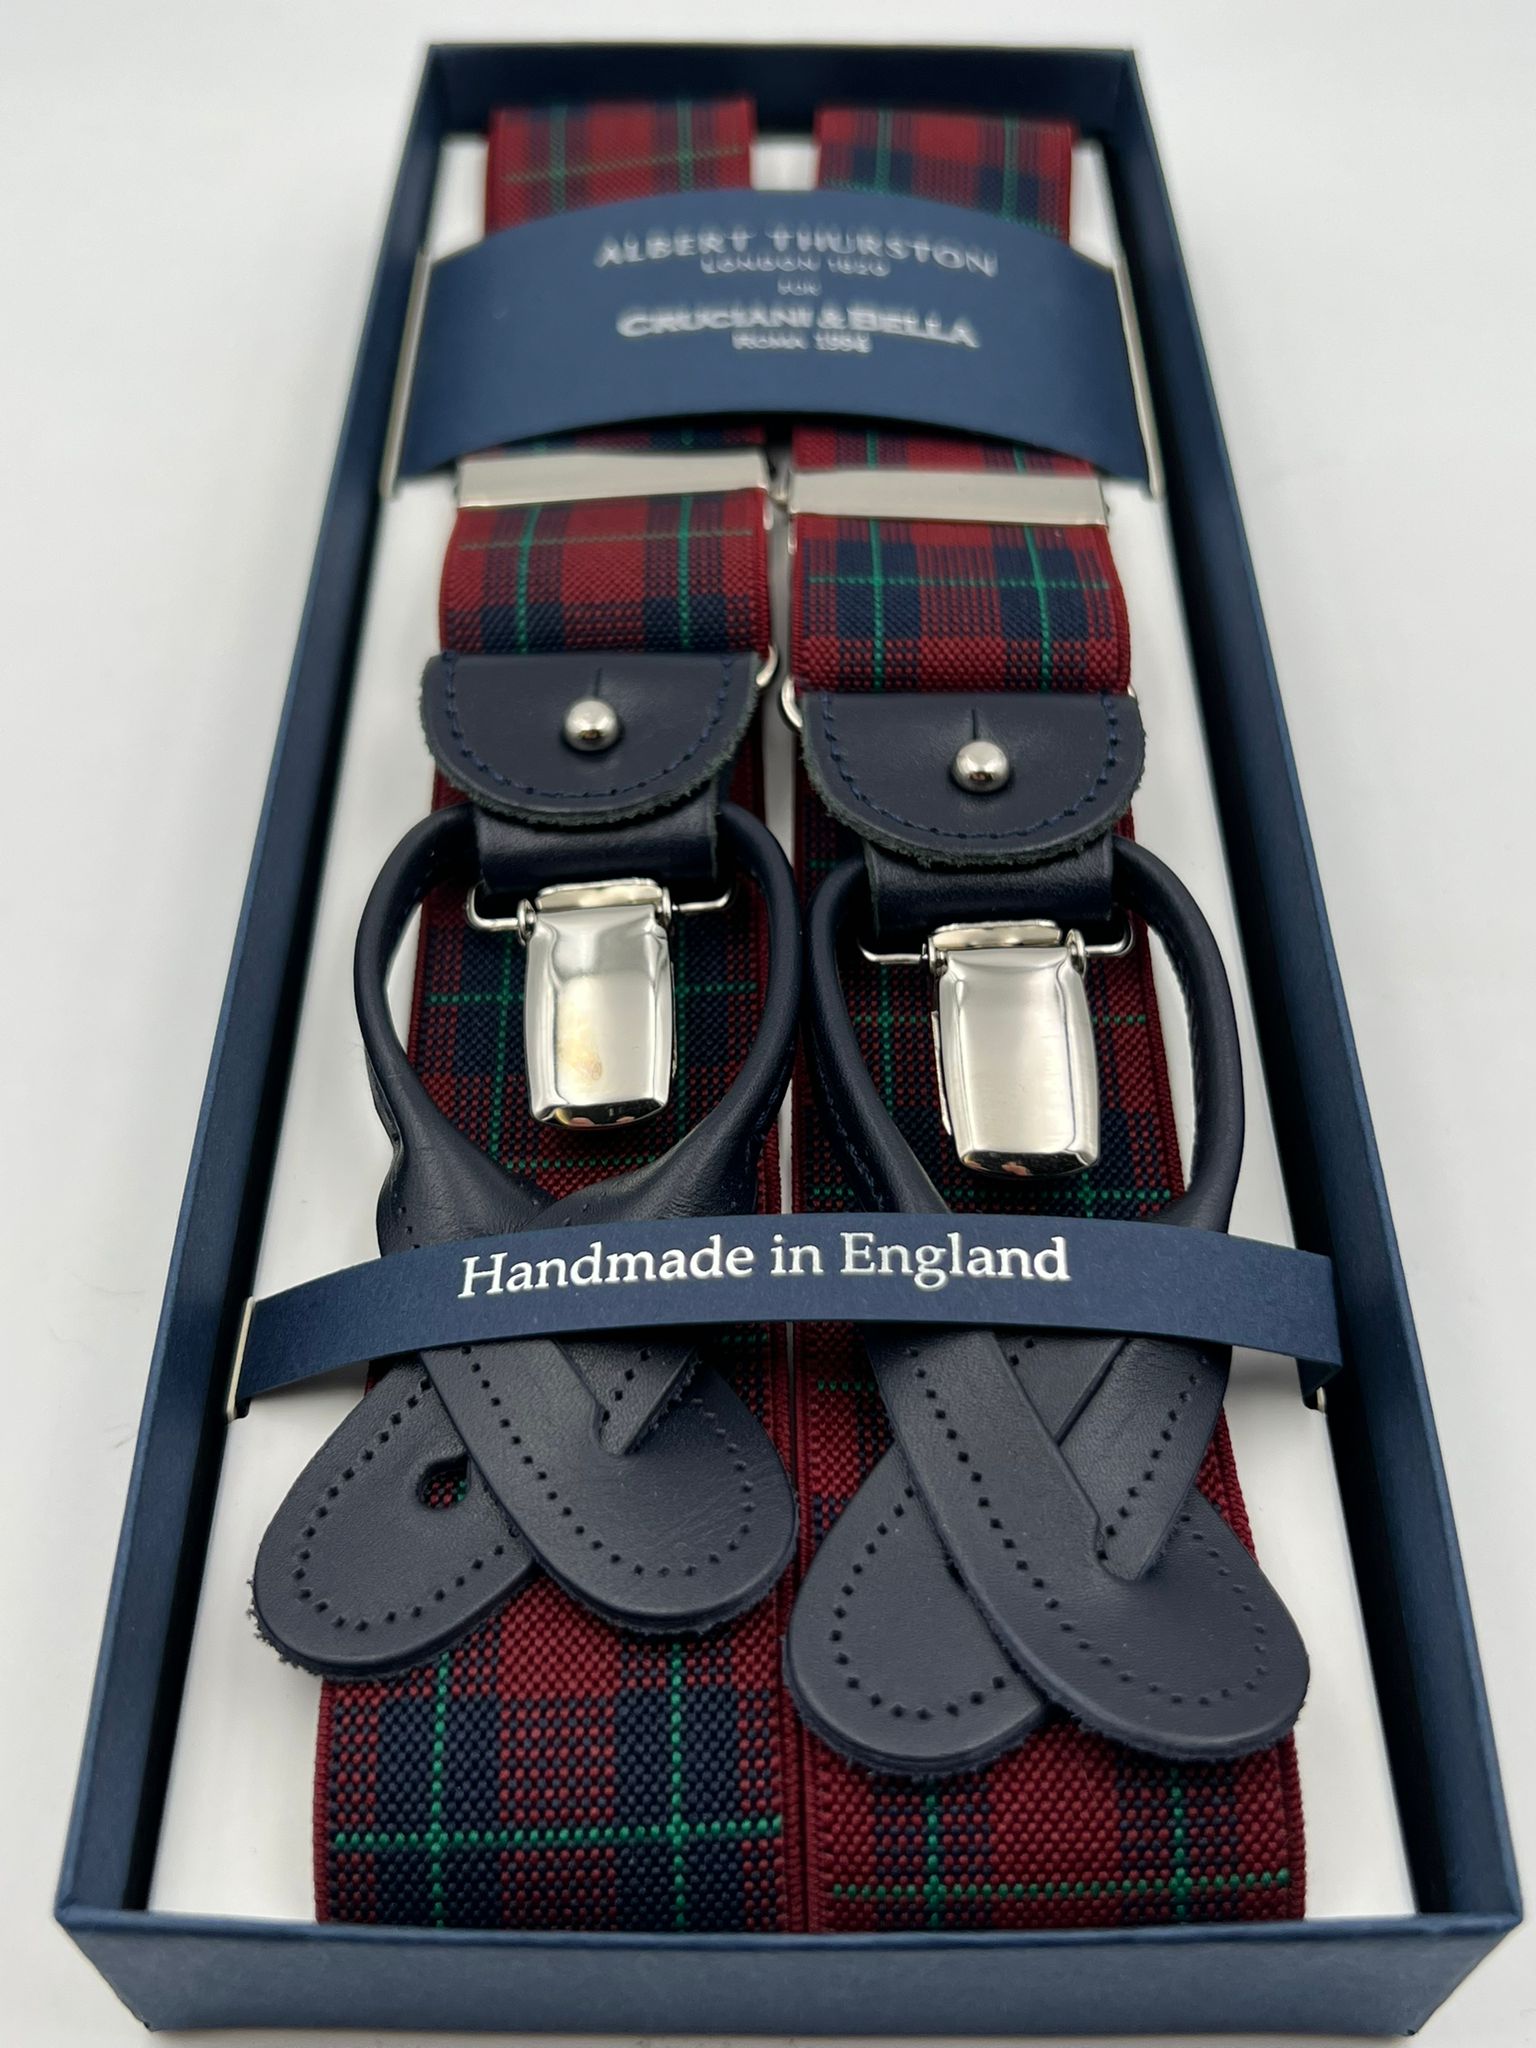 Albert Thurston for Cruciani & Bella Made in England 2 in 1 Adjustable Sizing 35 mm elastic braces Red Tartan Motif Y-Shaped Nickel Fittings Size Large #7388